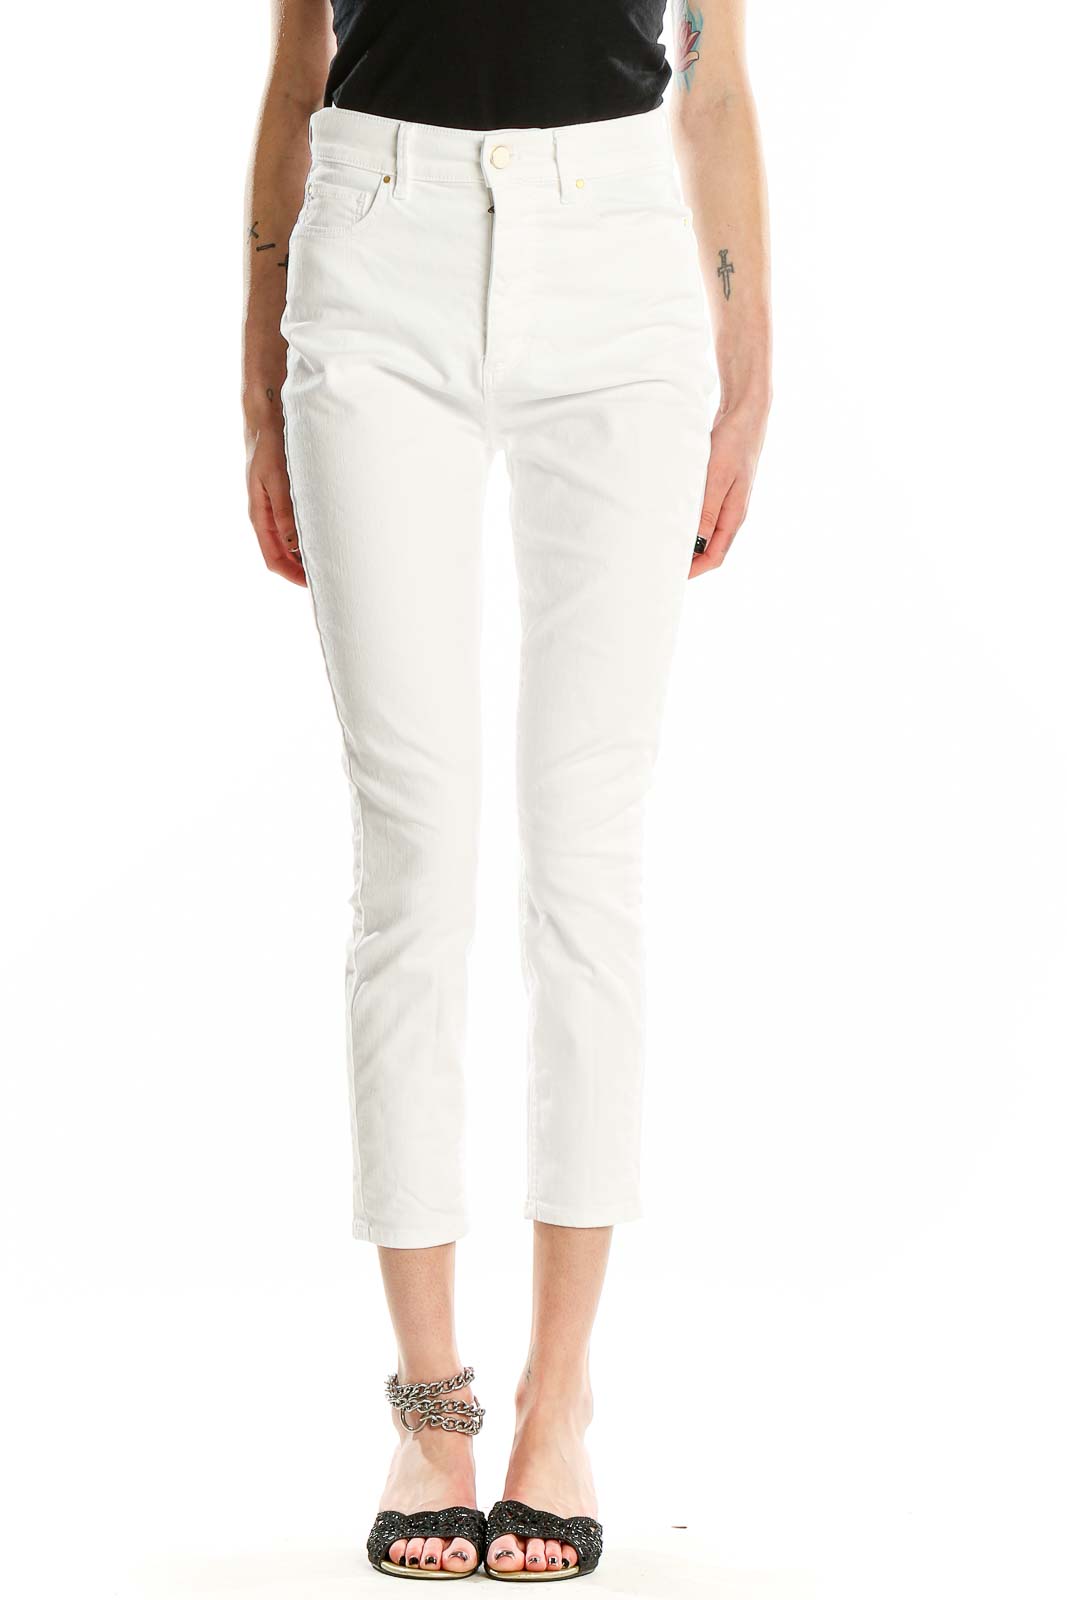 White Skinny Jeans Front